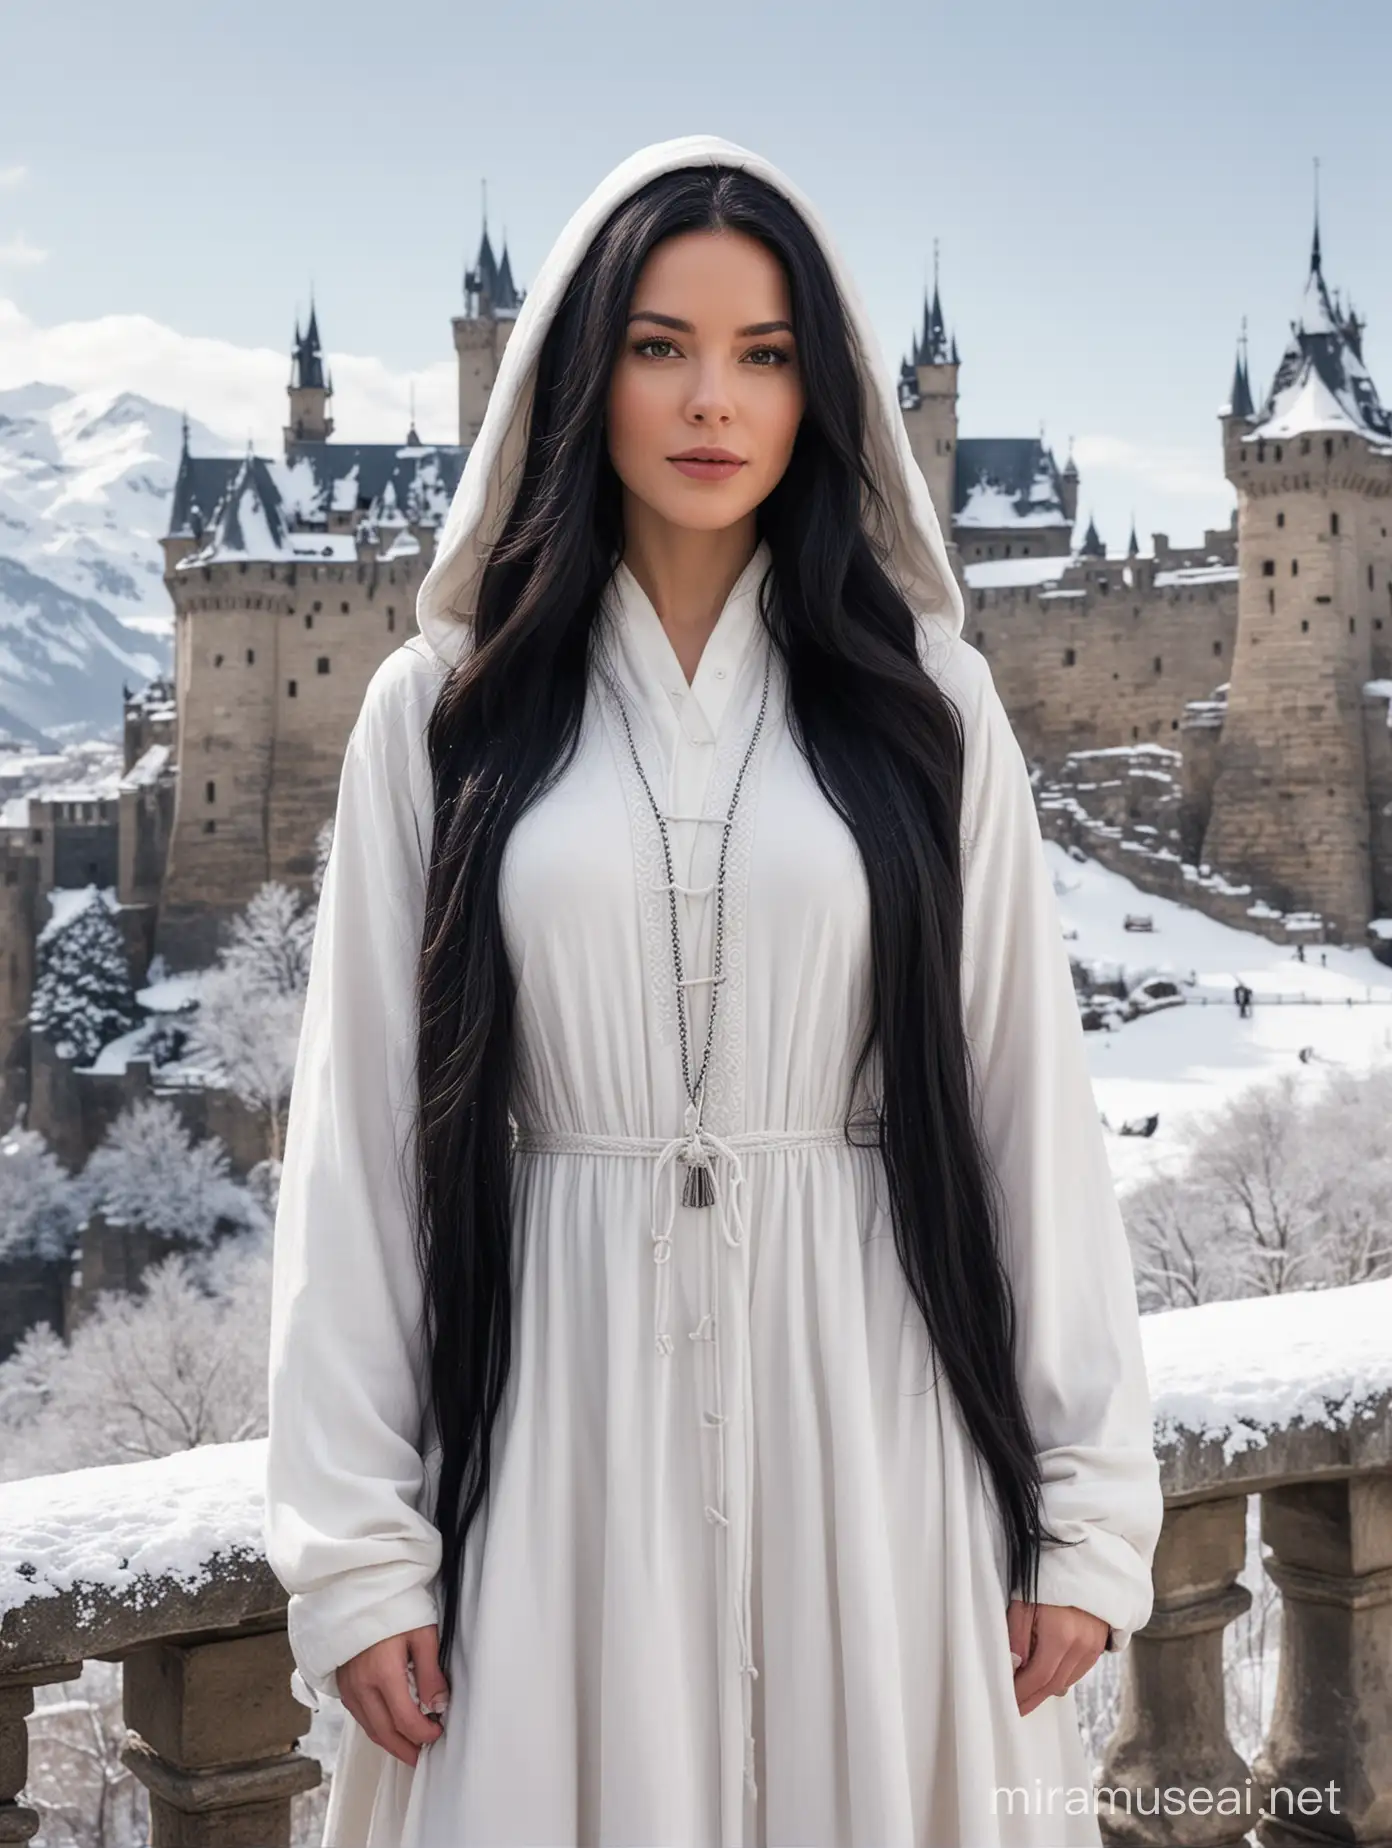 Woman in White Hooded Gown with SnowCapped Castle Background